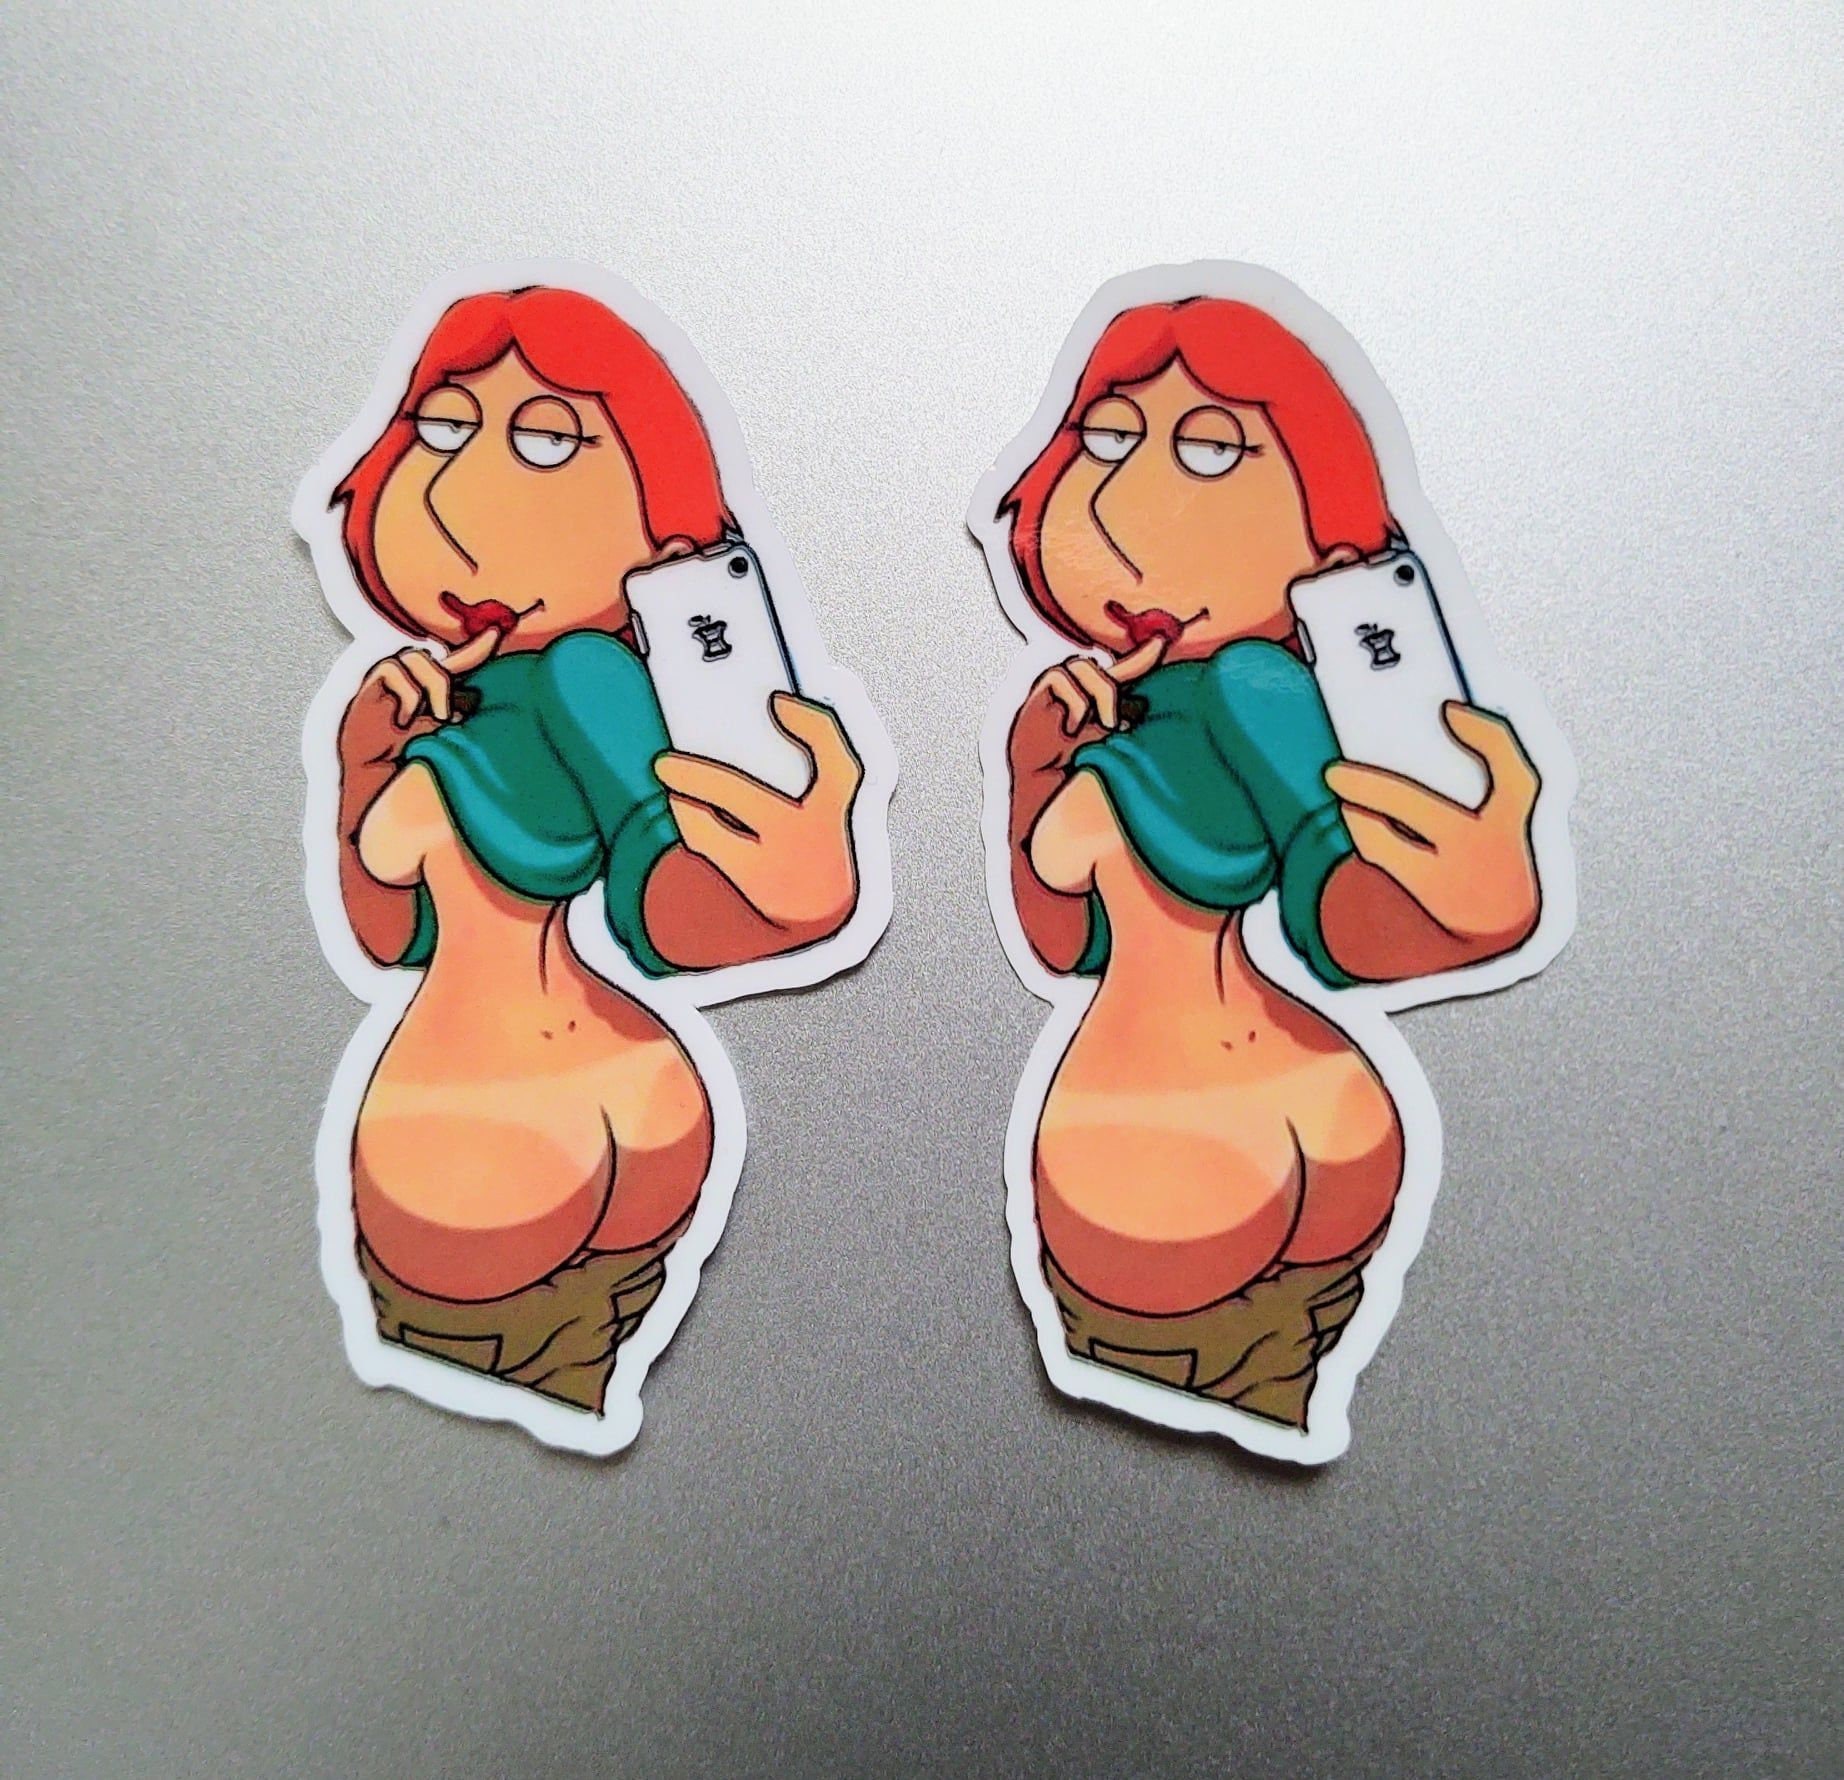 Naughty lois griffin